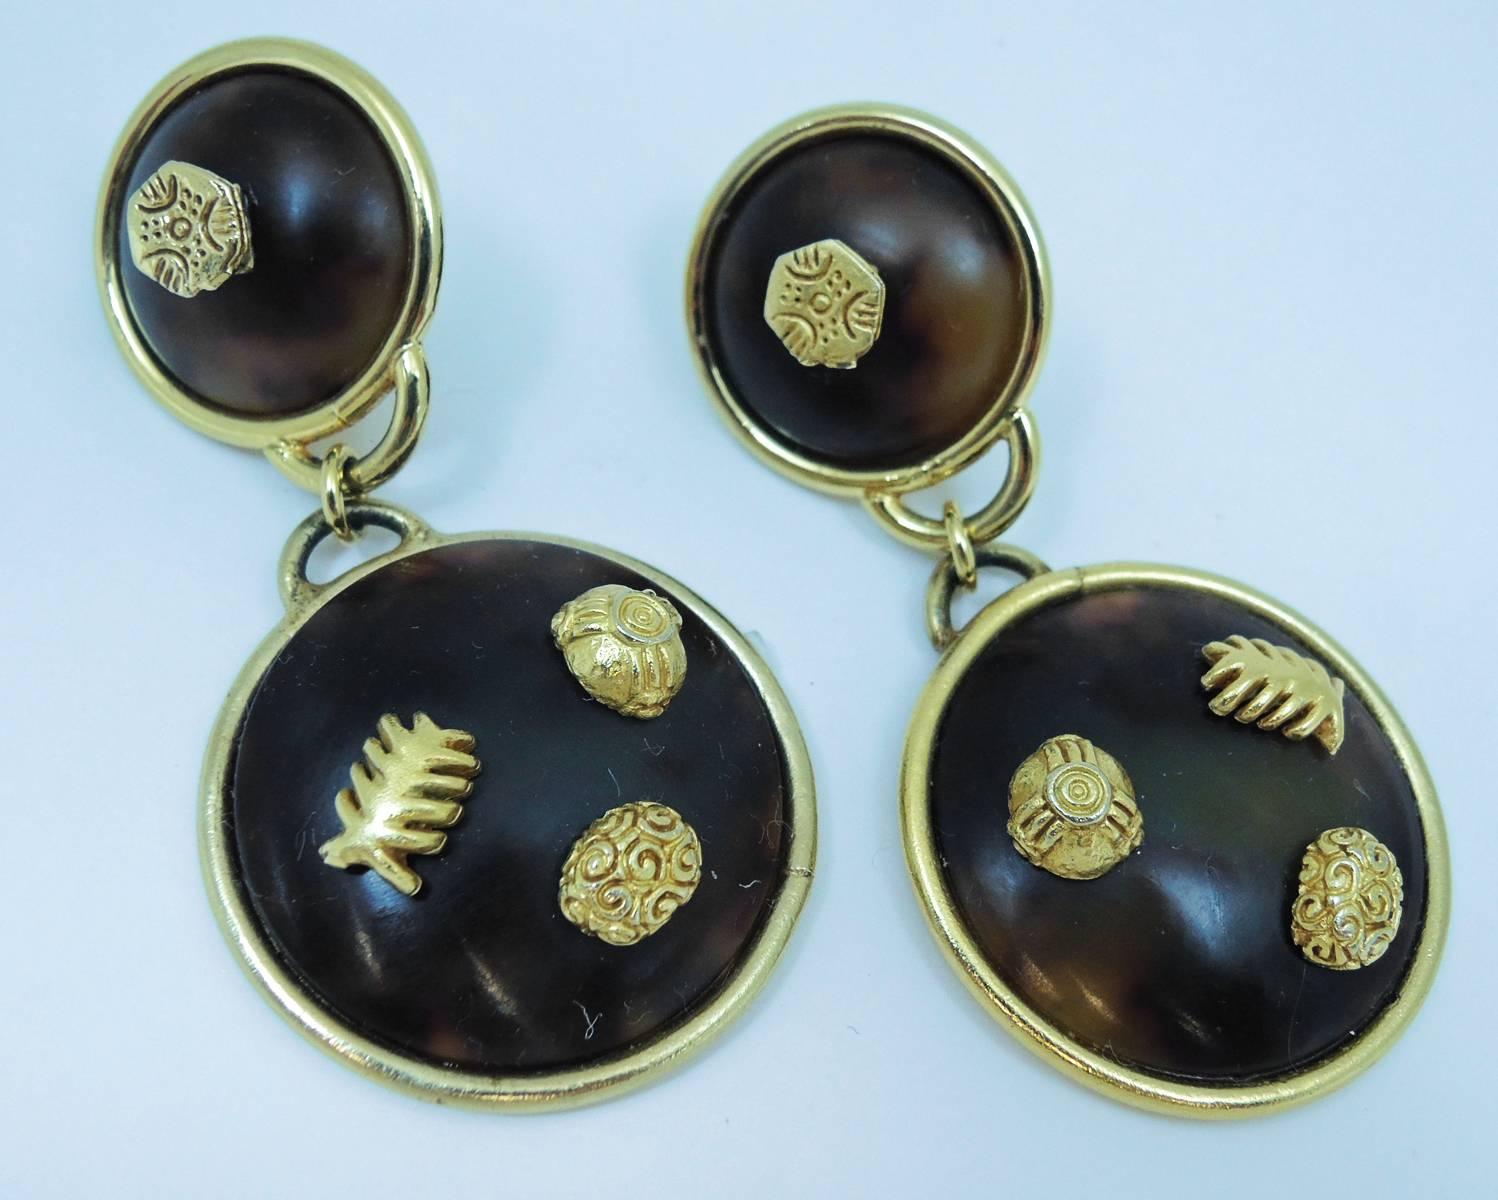 These Dominique Aurientis earrings are amazing! There are two circular faux tortoise shell buttons drops that graduate in size in a gold frame. The buttons have decorative 3-dimensional designs on them. The matching earrings are clip back and